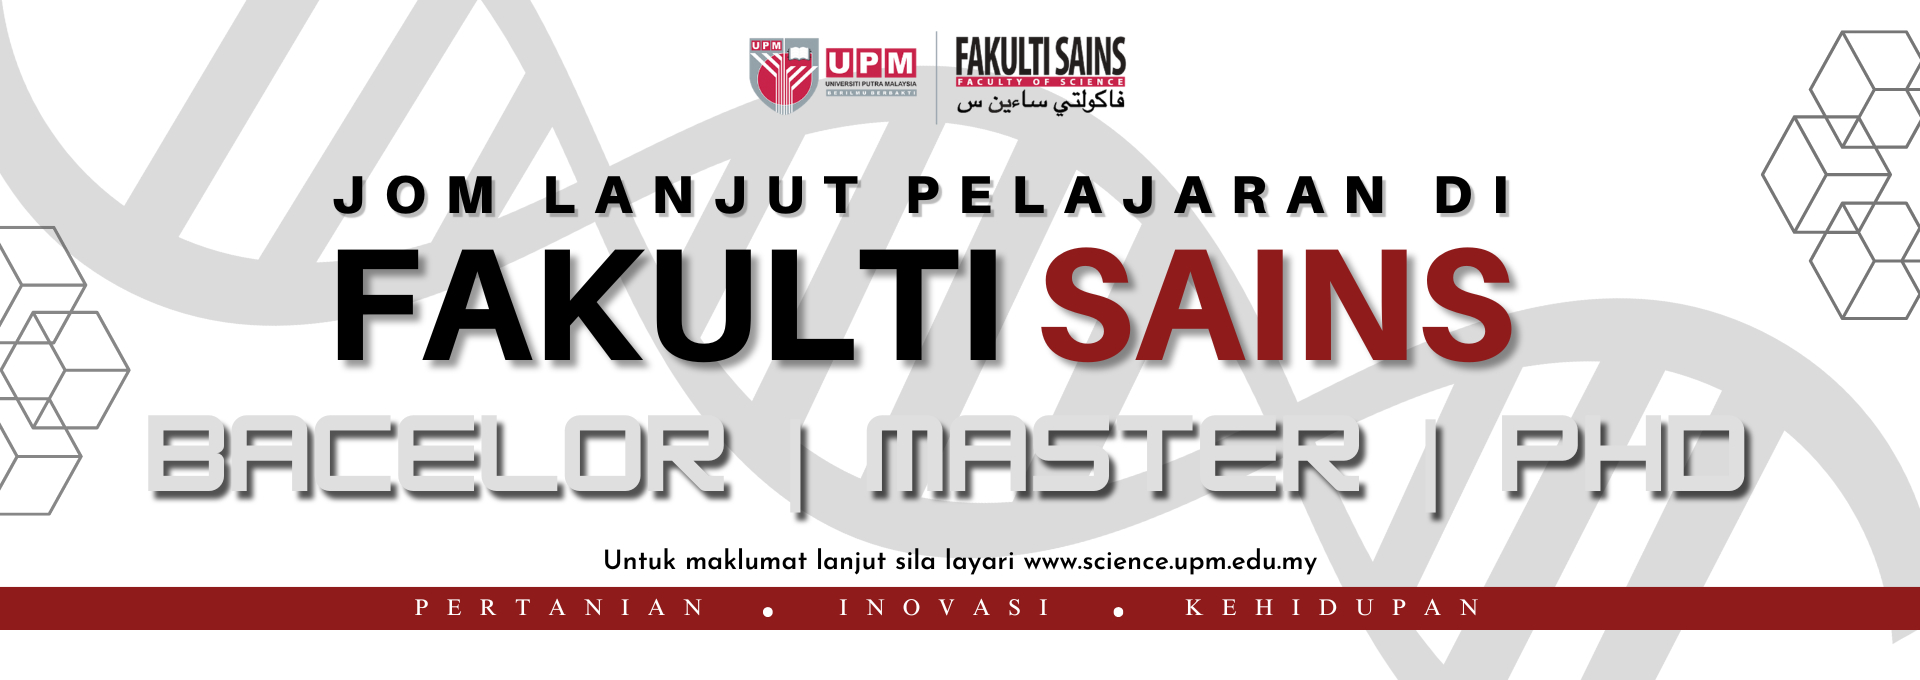 LET'S STUDY AT FACULTY OF SCIENCE UPM